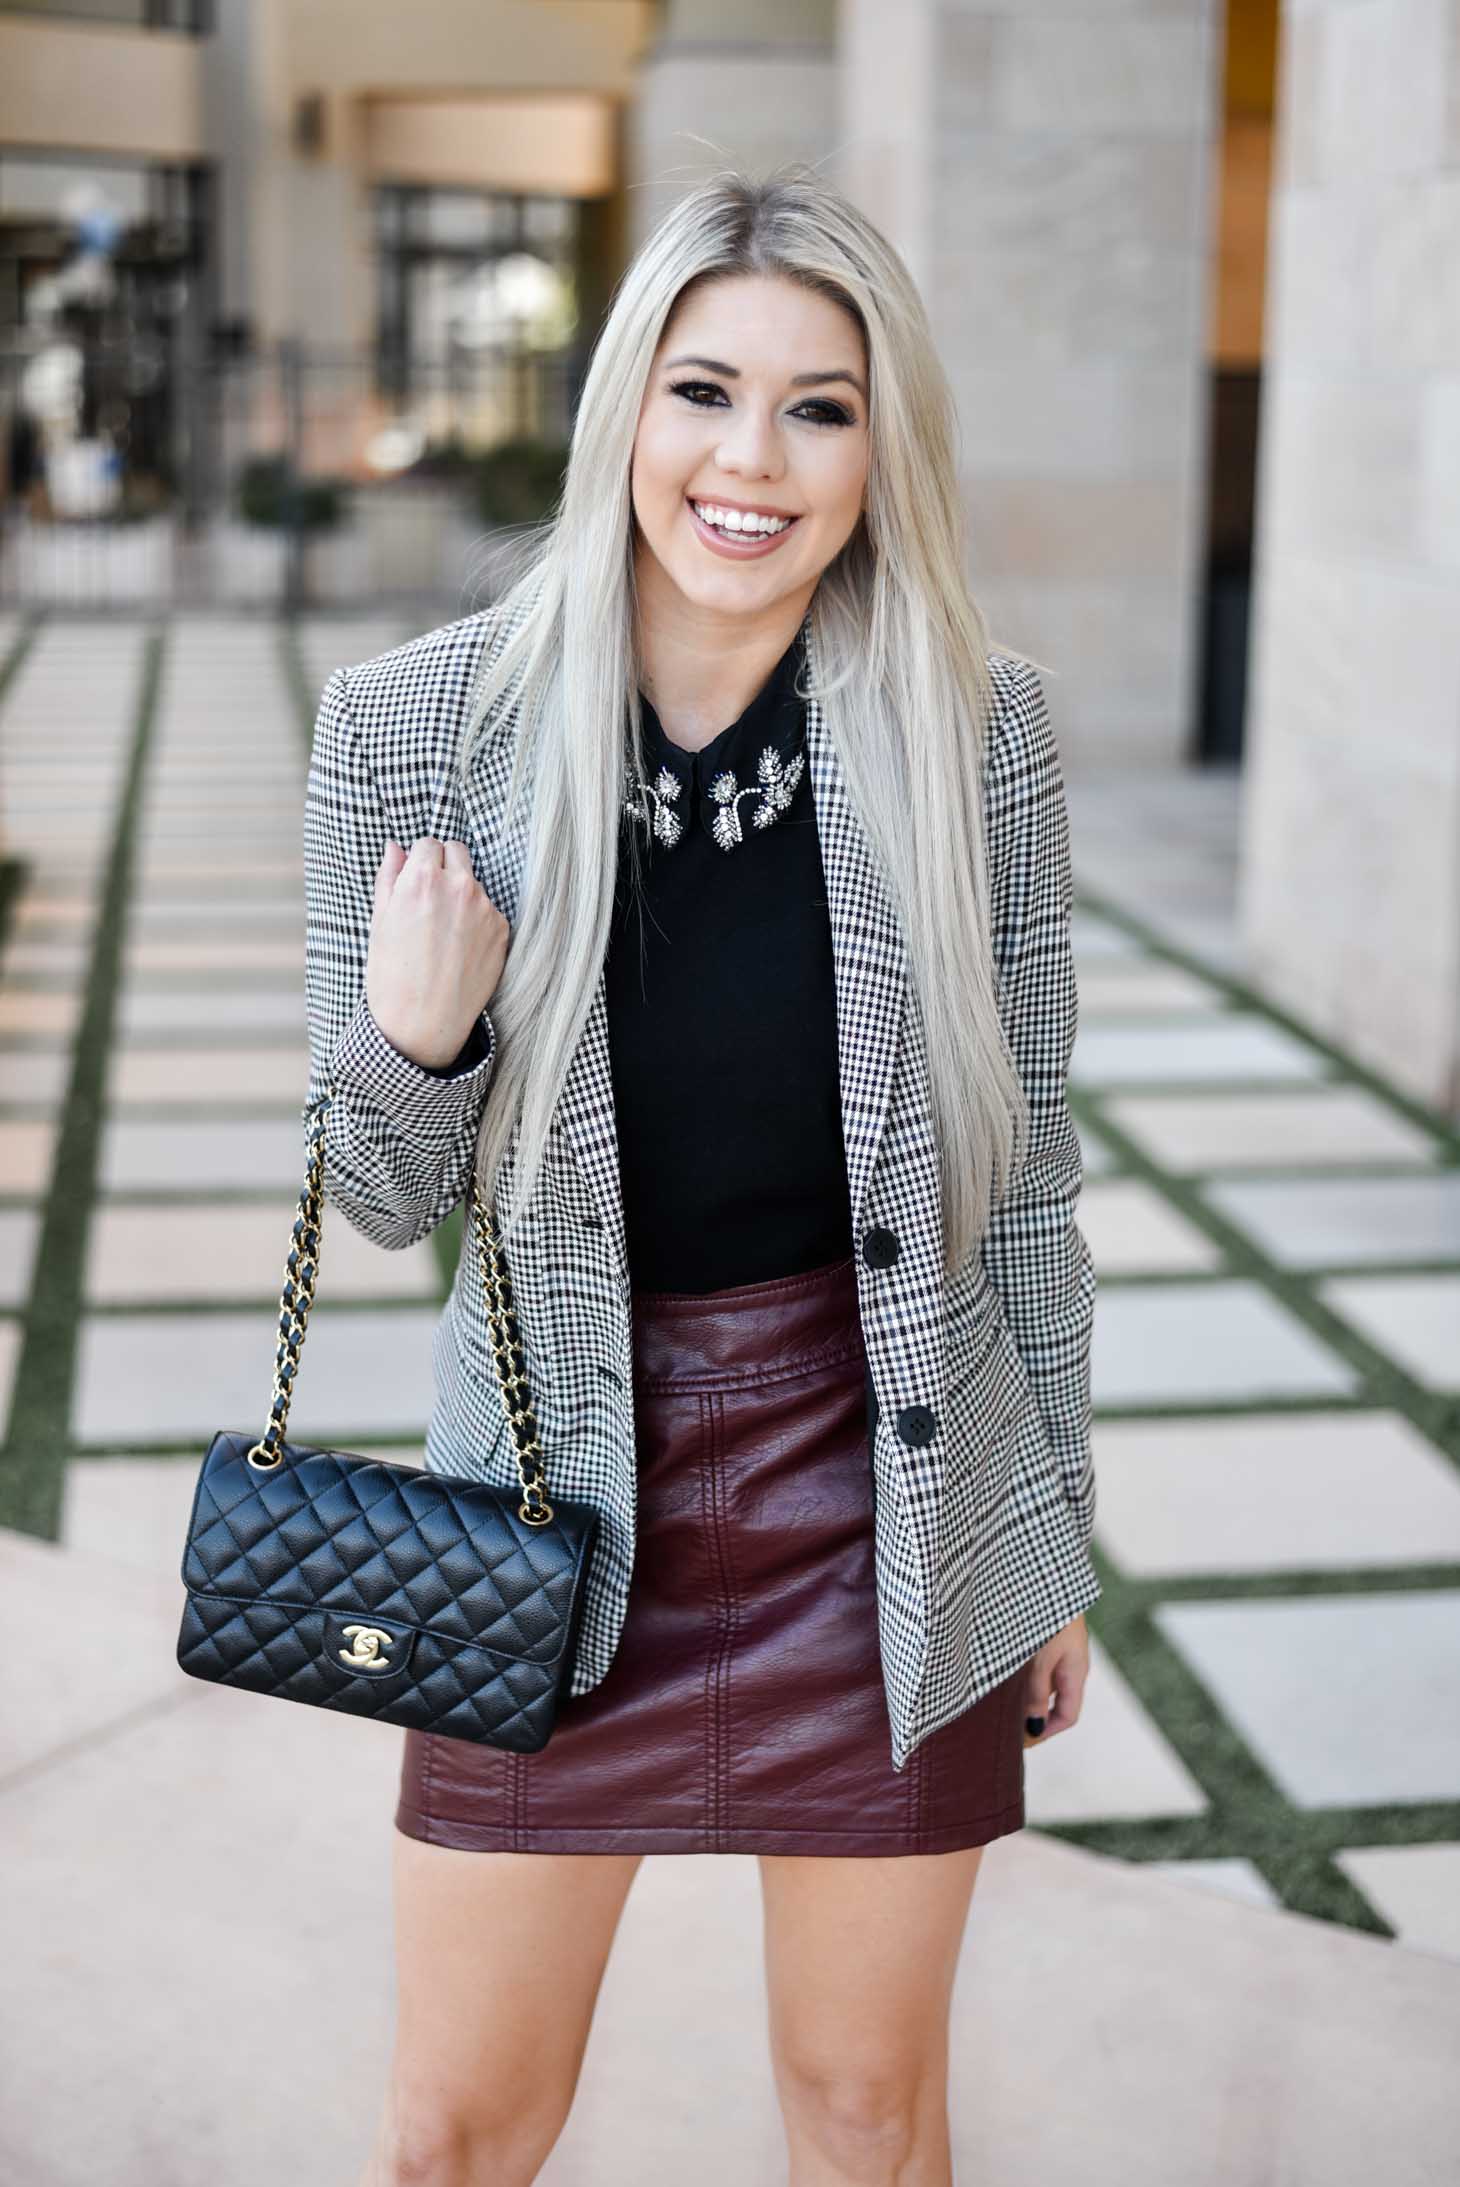 Erin Elizabeth of Wink and a Twirl shares the perfect way to style a leather mini this fall